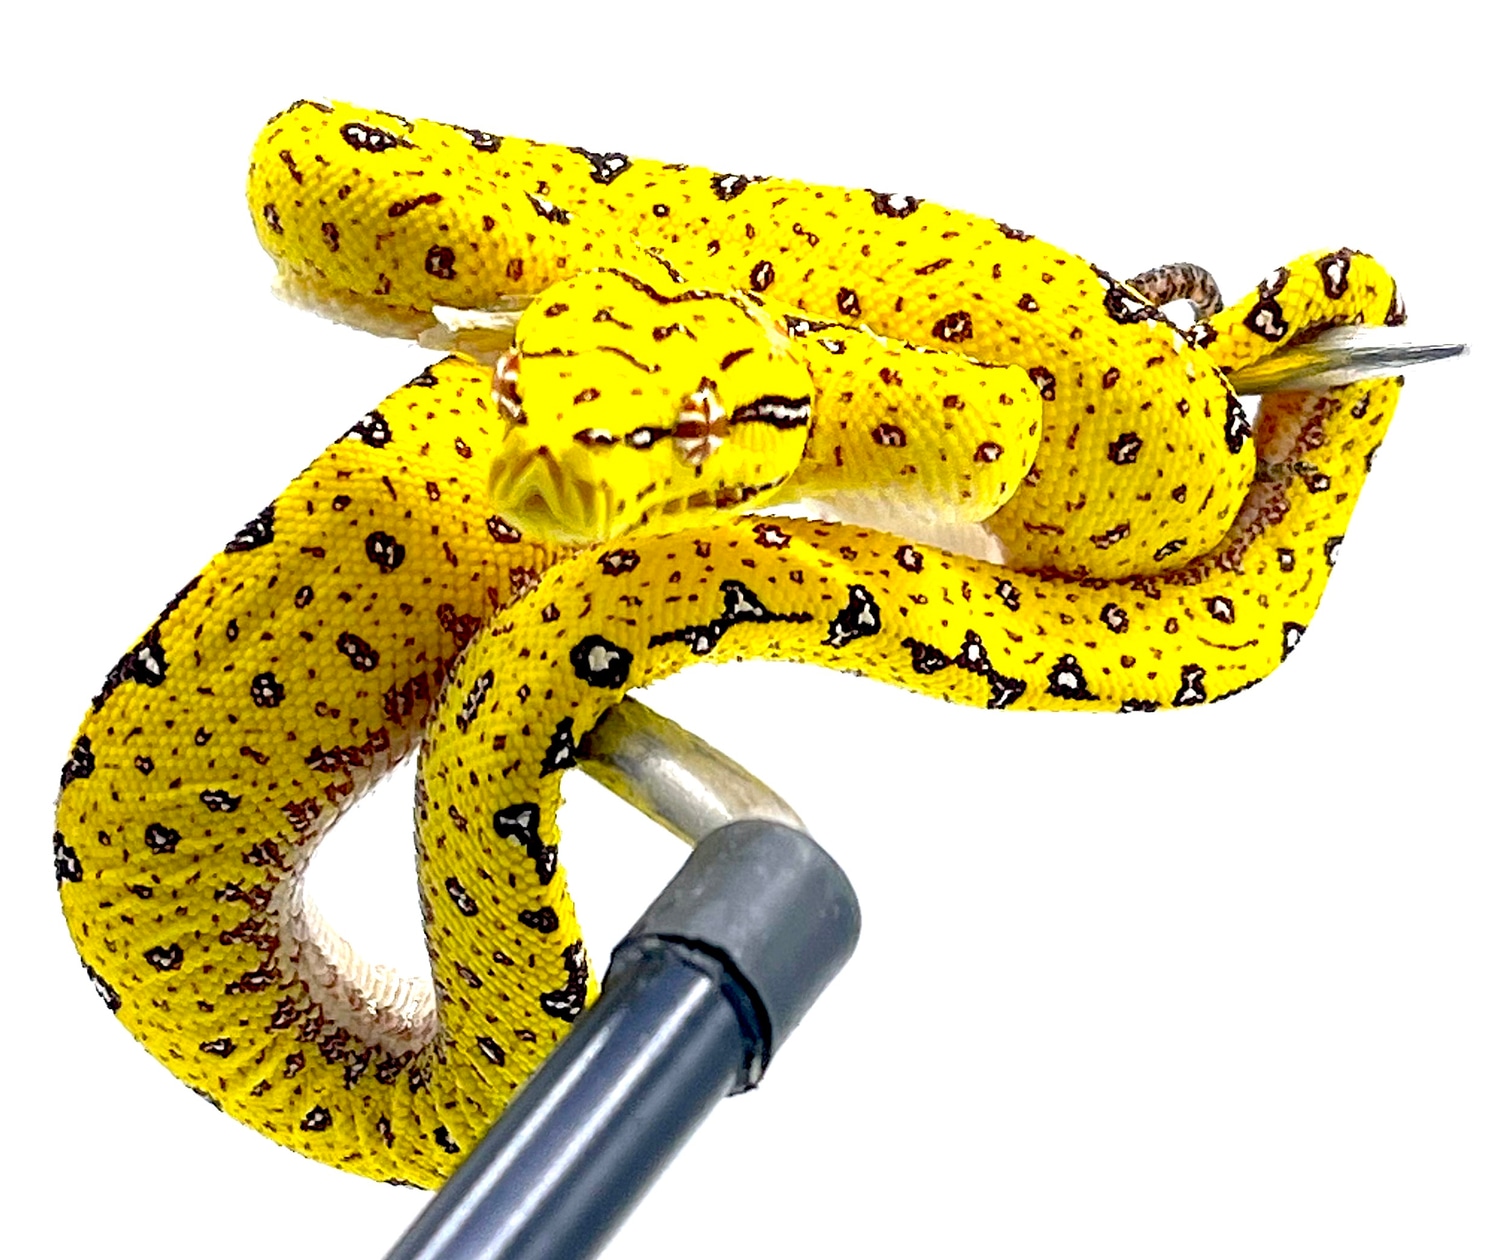 Biak Neonate Green Tree Python by Reptile Pets Direct